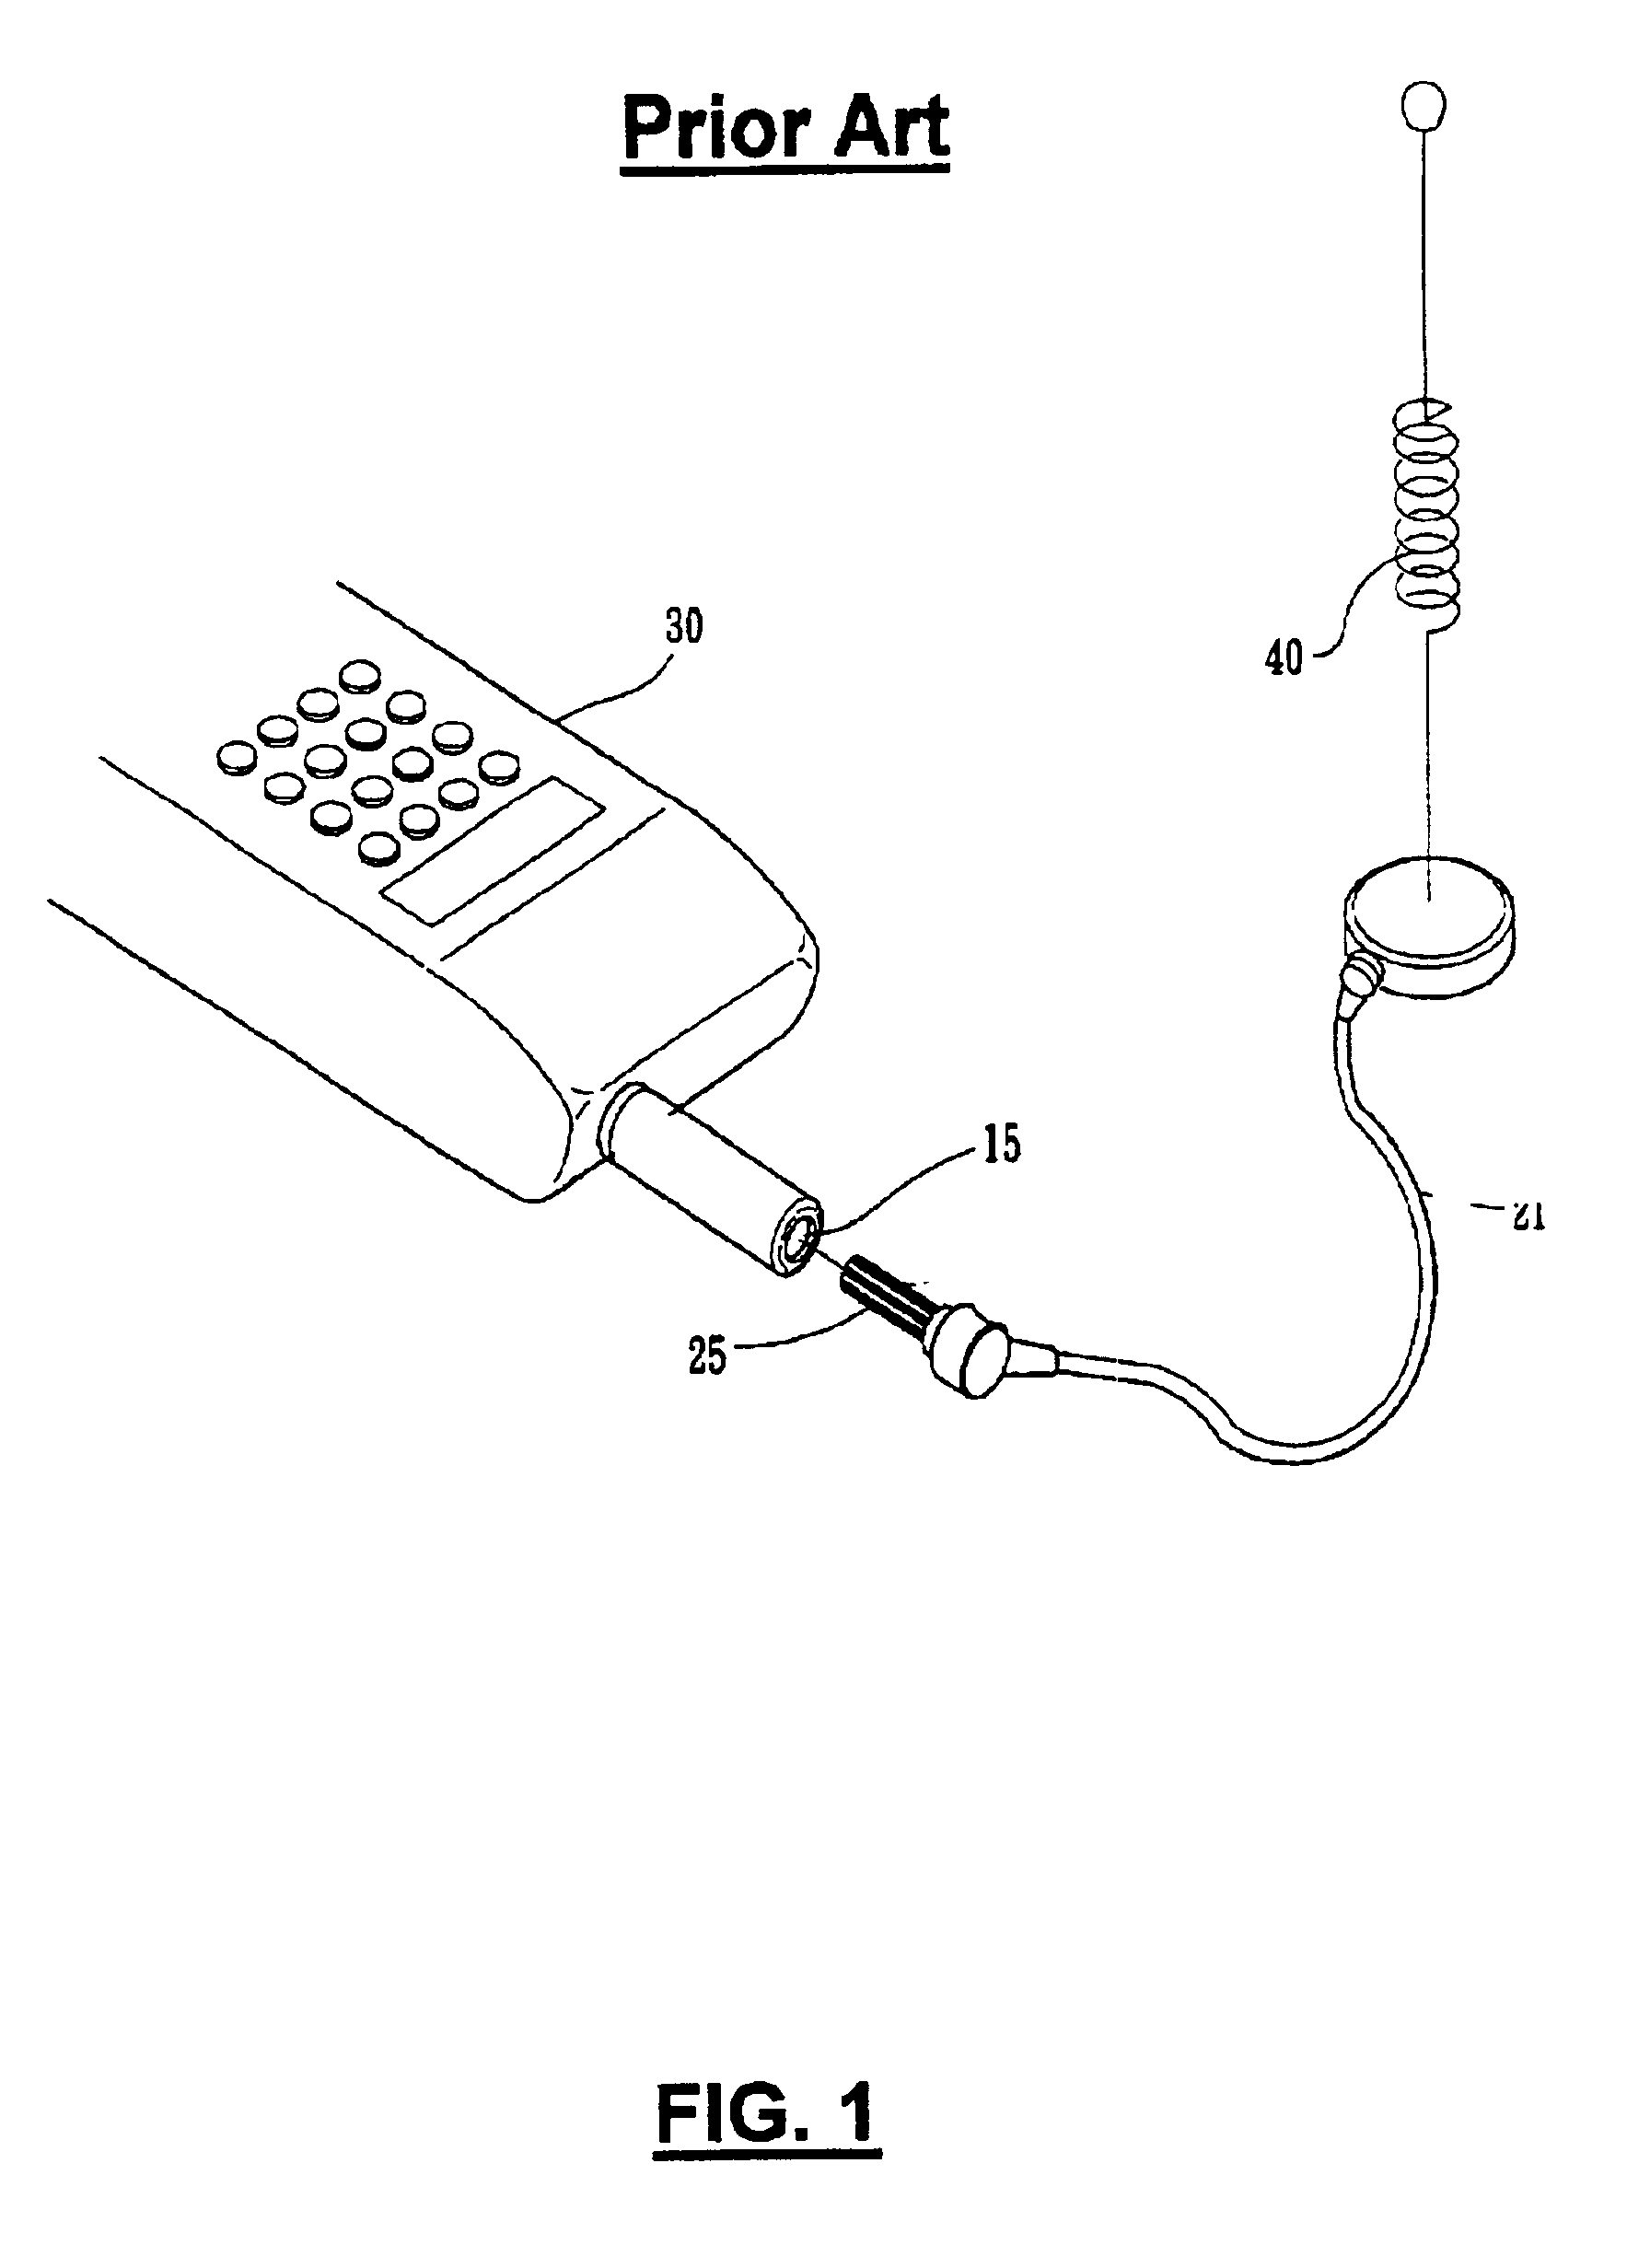 Method and apparatus for insuring integrity of a connectorized antenna